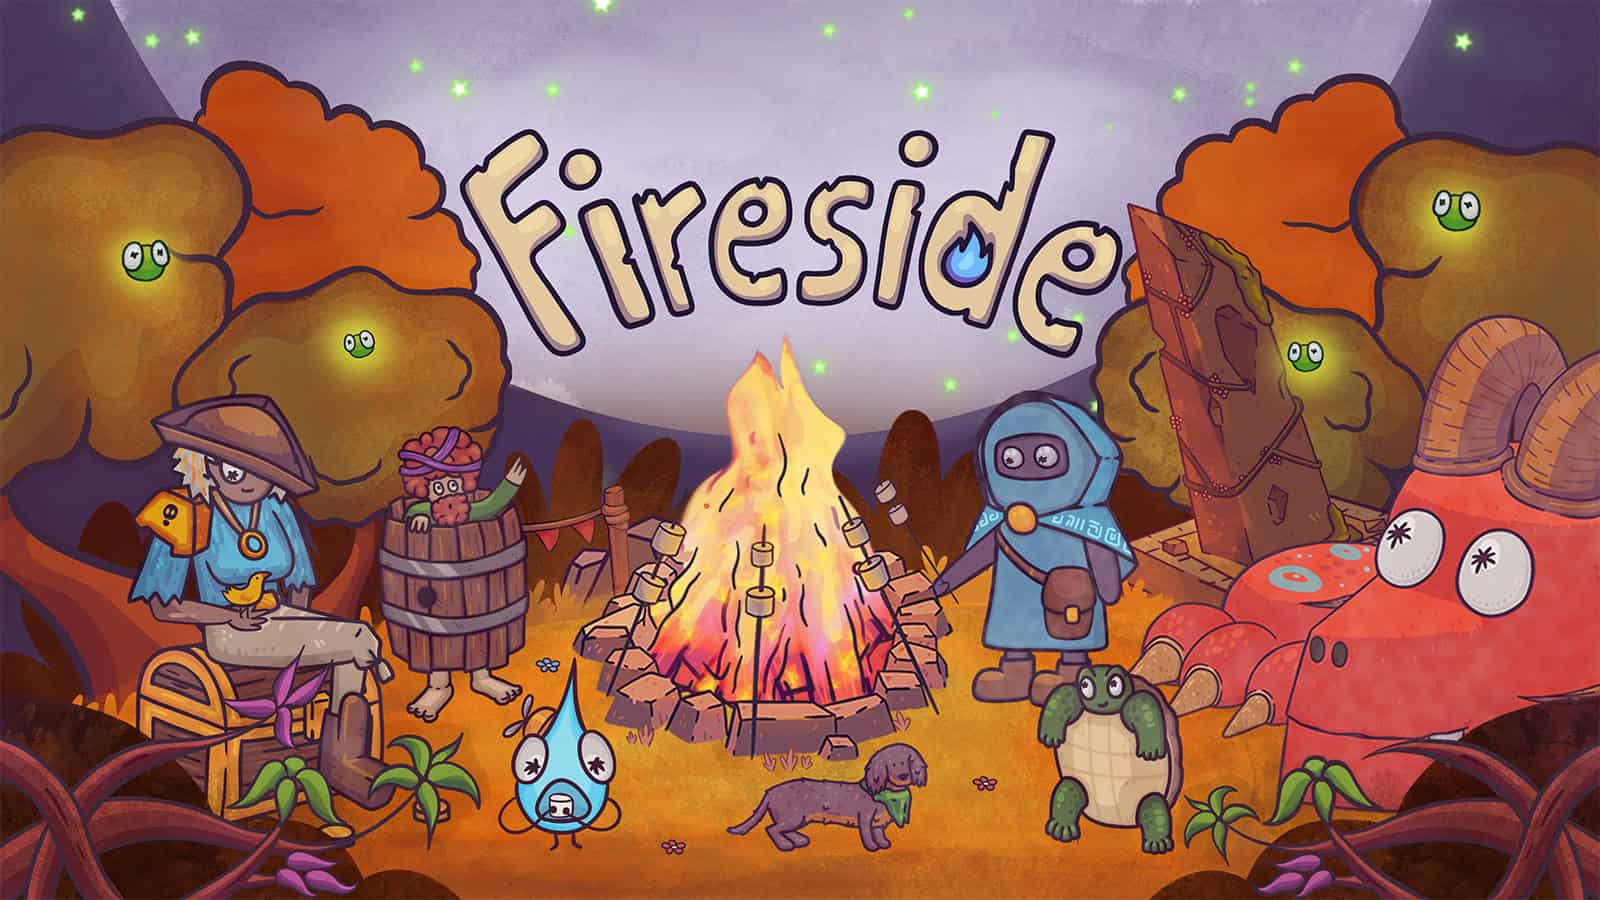 The primary artwork for Fireside, showing several characters huddled around a campfire